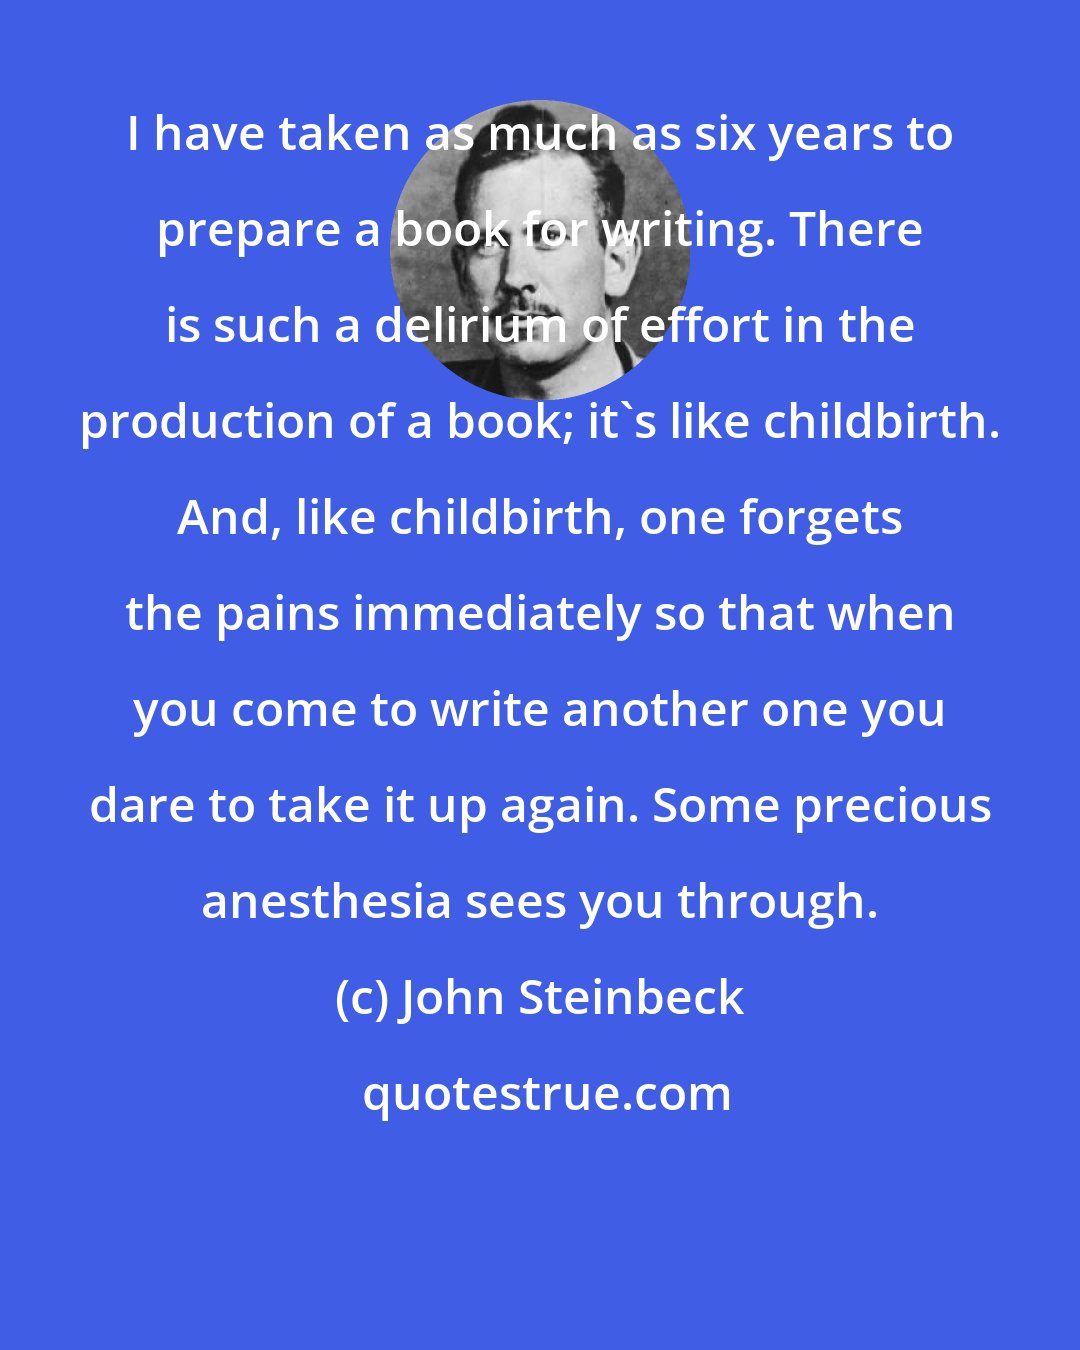 John Steinbeck: I have taken as much as six years to prepare a book for writing. There is such a delirium of effort in the production of a book; it's like childbirth. And, like childbirth, one forgets the pains immediately so that when you come to write another one you dare to take it up again. Some precious anesthesia sees you through.